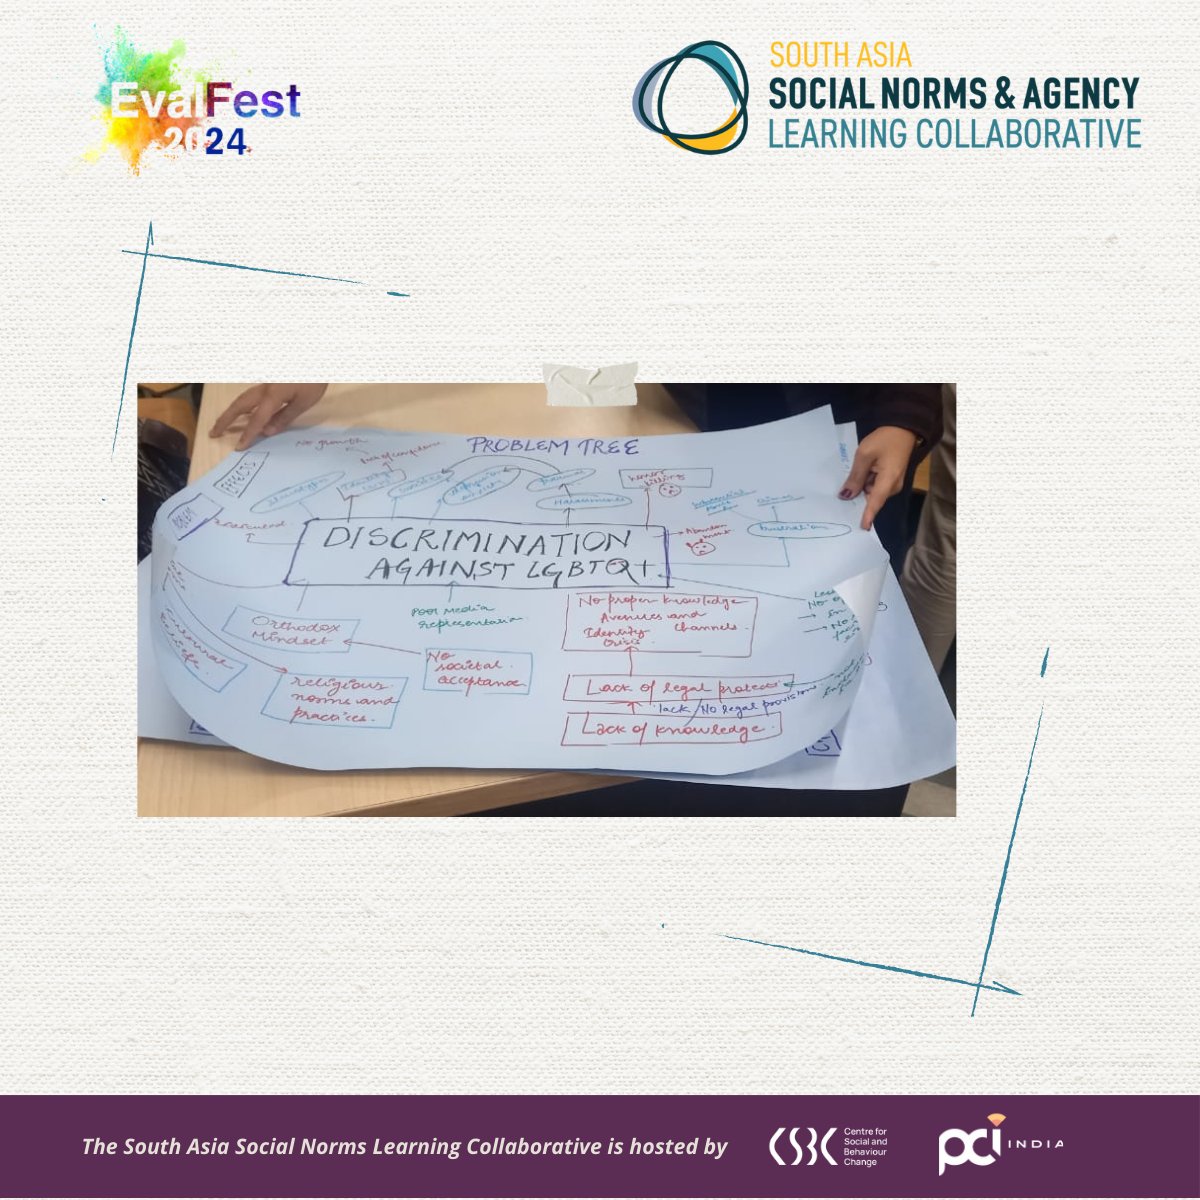 📸 Day 2 | Satellite Sessions of #EvalFest 2024

The evening session at @LDelhiuniv focused on 'Measuring of #SocialNorms'. Facilitators explored quantitative and qualitative methods along with the ins-and-outs of a social networks analysis.

@ECOI_India, thank you for having us!